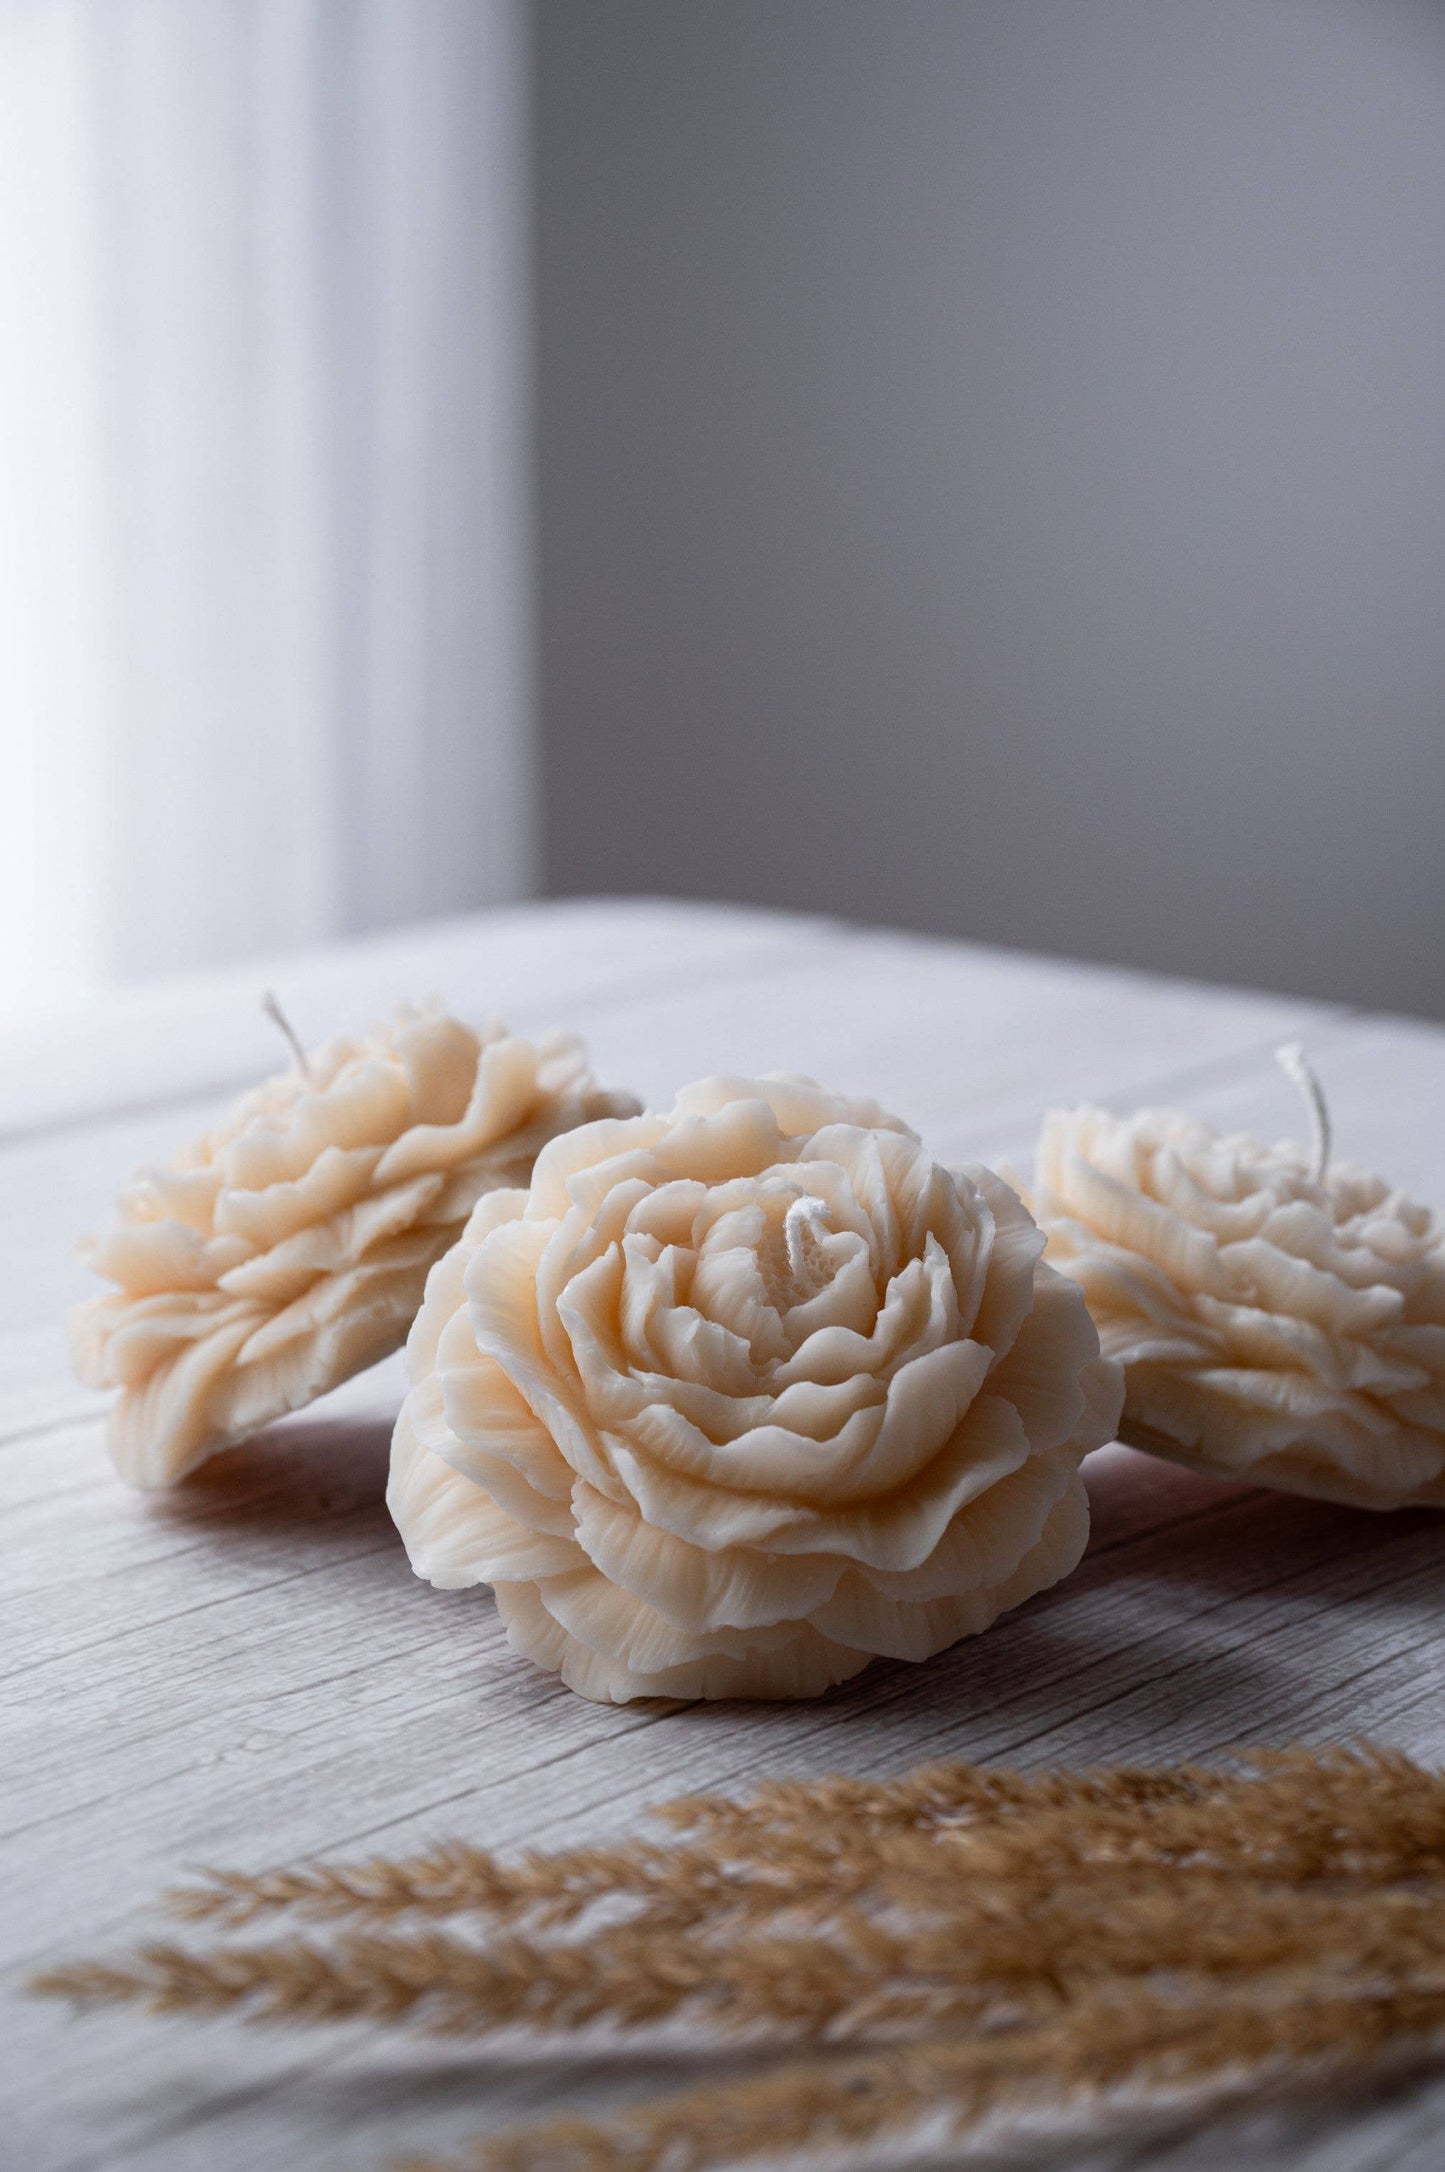 Allure CA - Peony Flower Candle